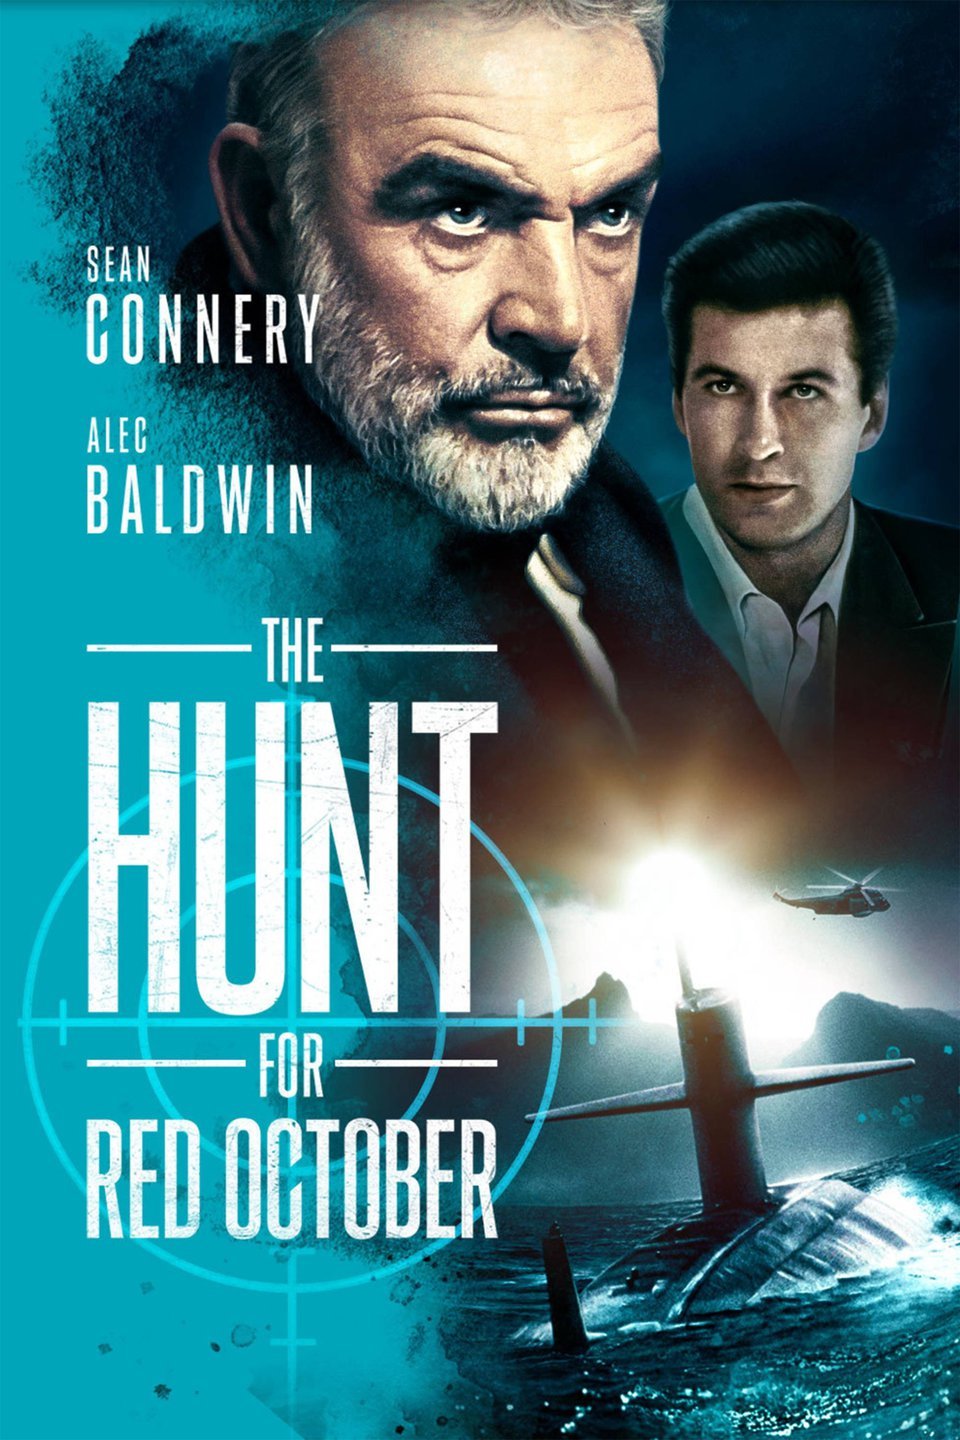 The Hunt for Red October (1990) | Soundeffects Wiki | Fandom